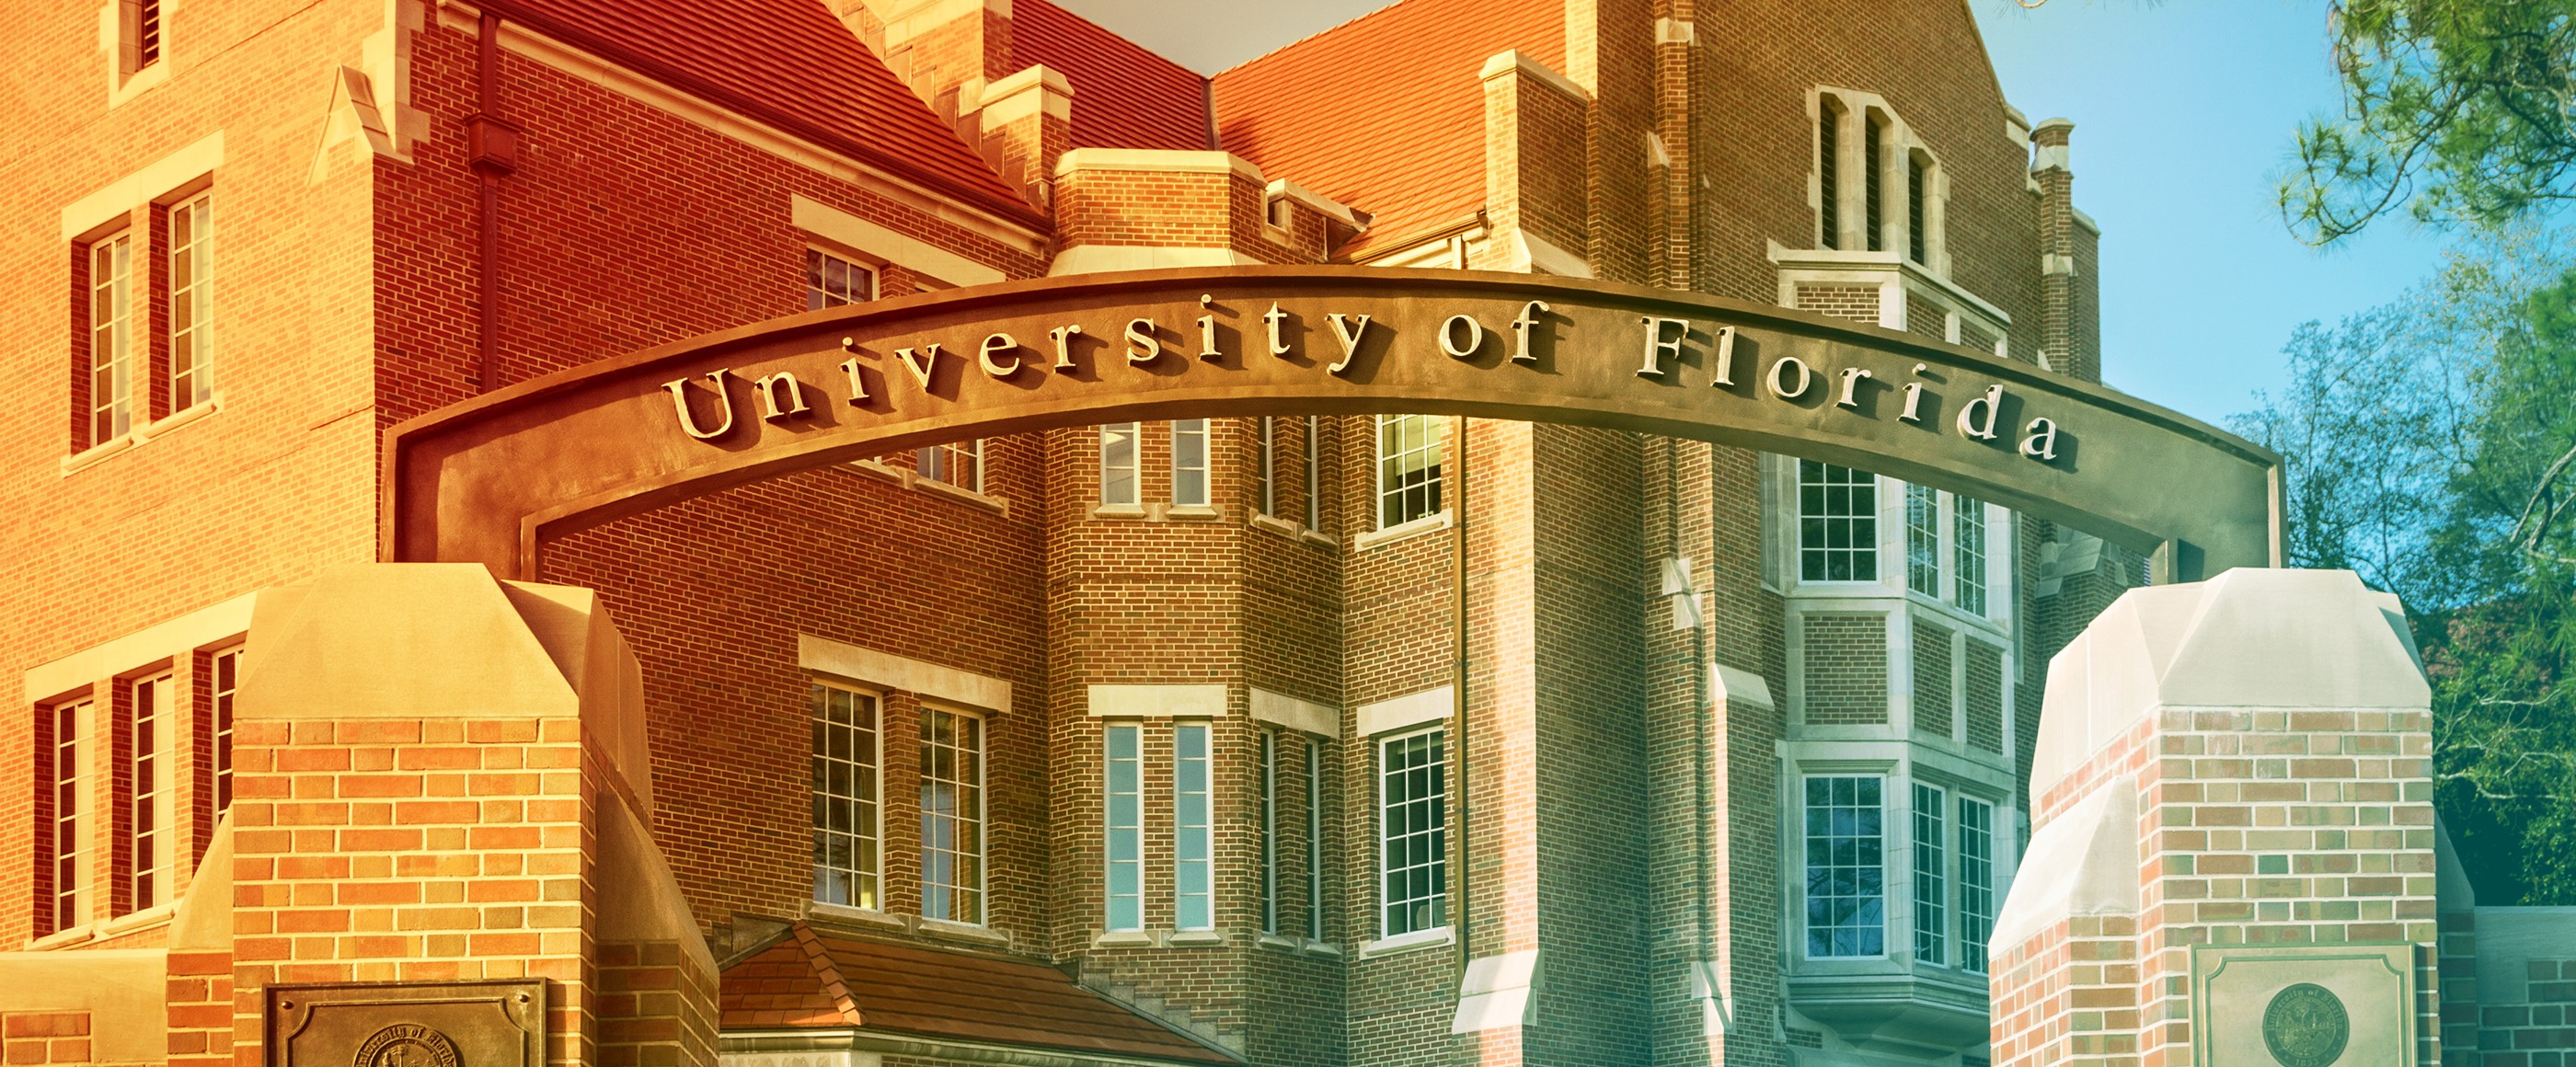 A picture of the northeast entrance of the University of Florida